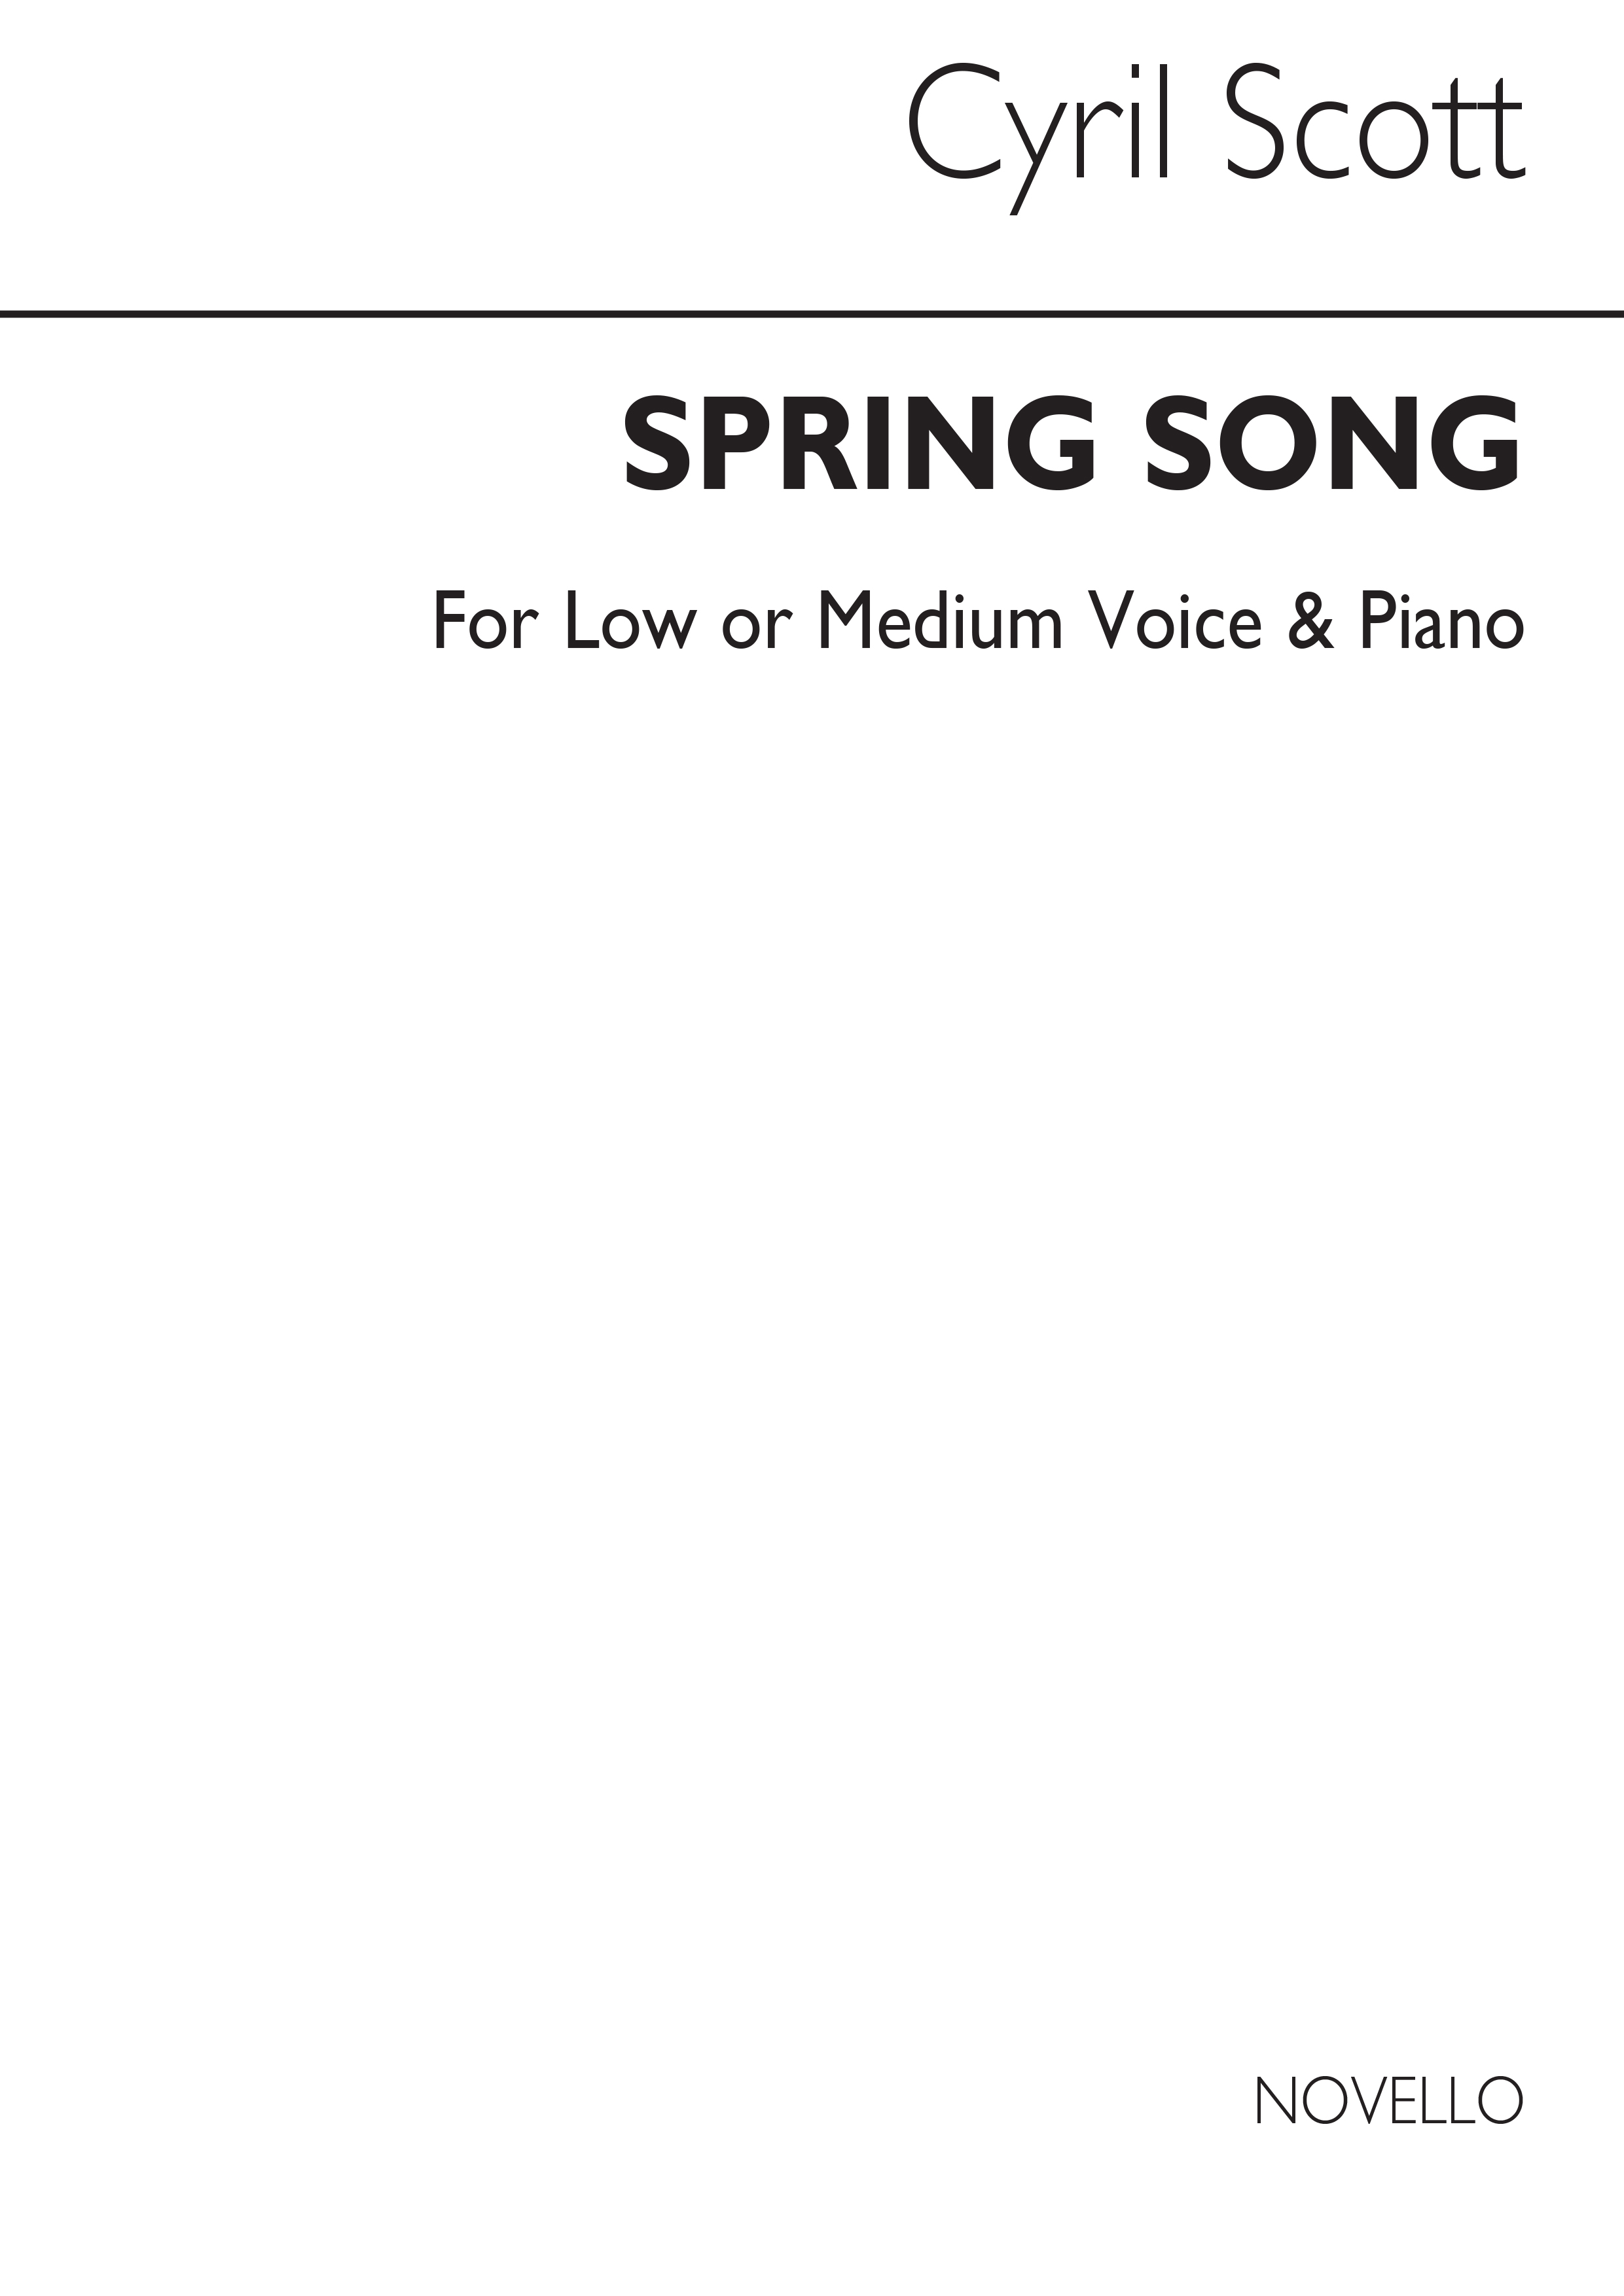 Cyril Scott: Spring Song-low Or Medium Voice/Piano